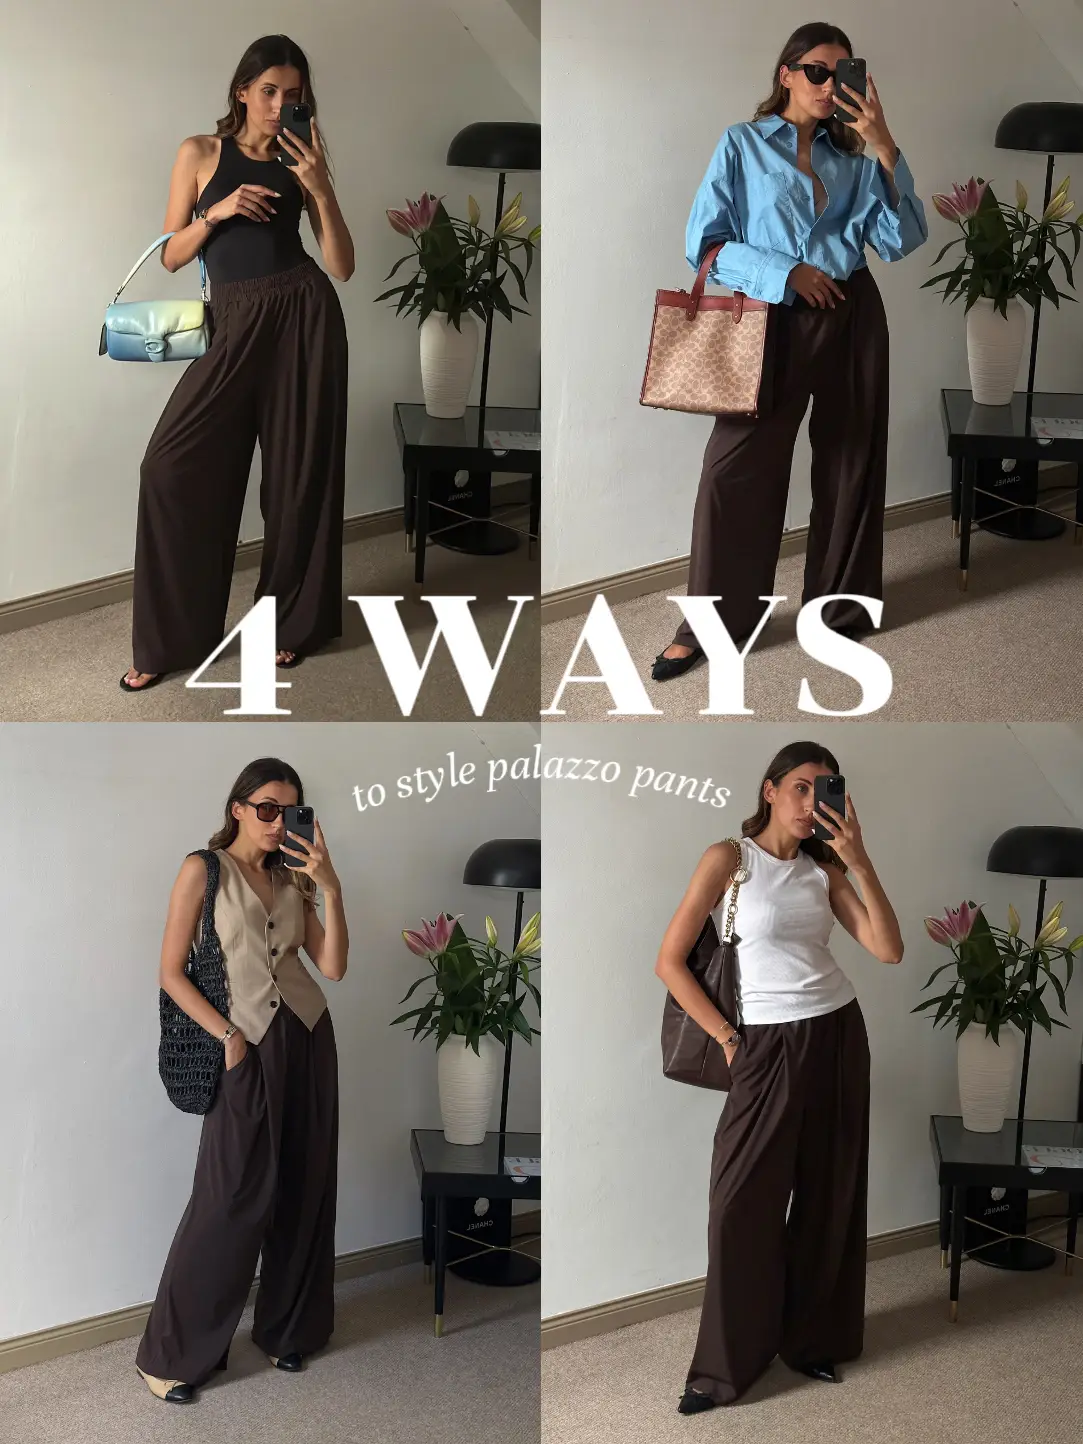 4 WAYS TO STYLE PALAZZO PANTS, Gallery posted by Greta Sam